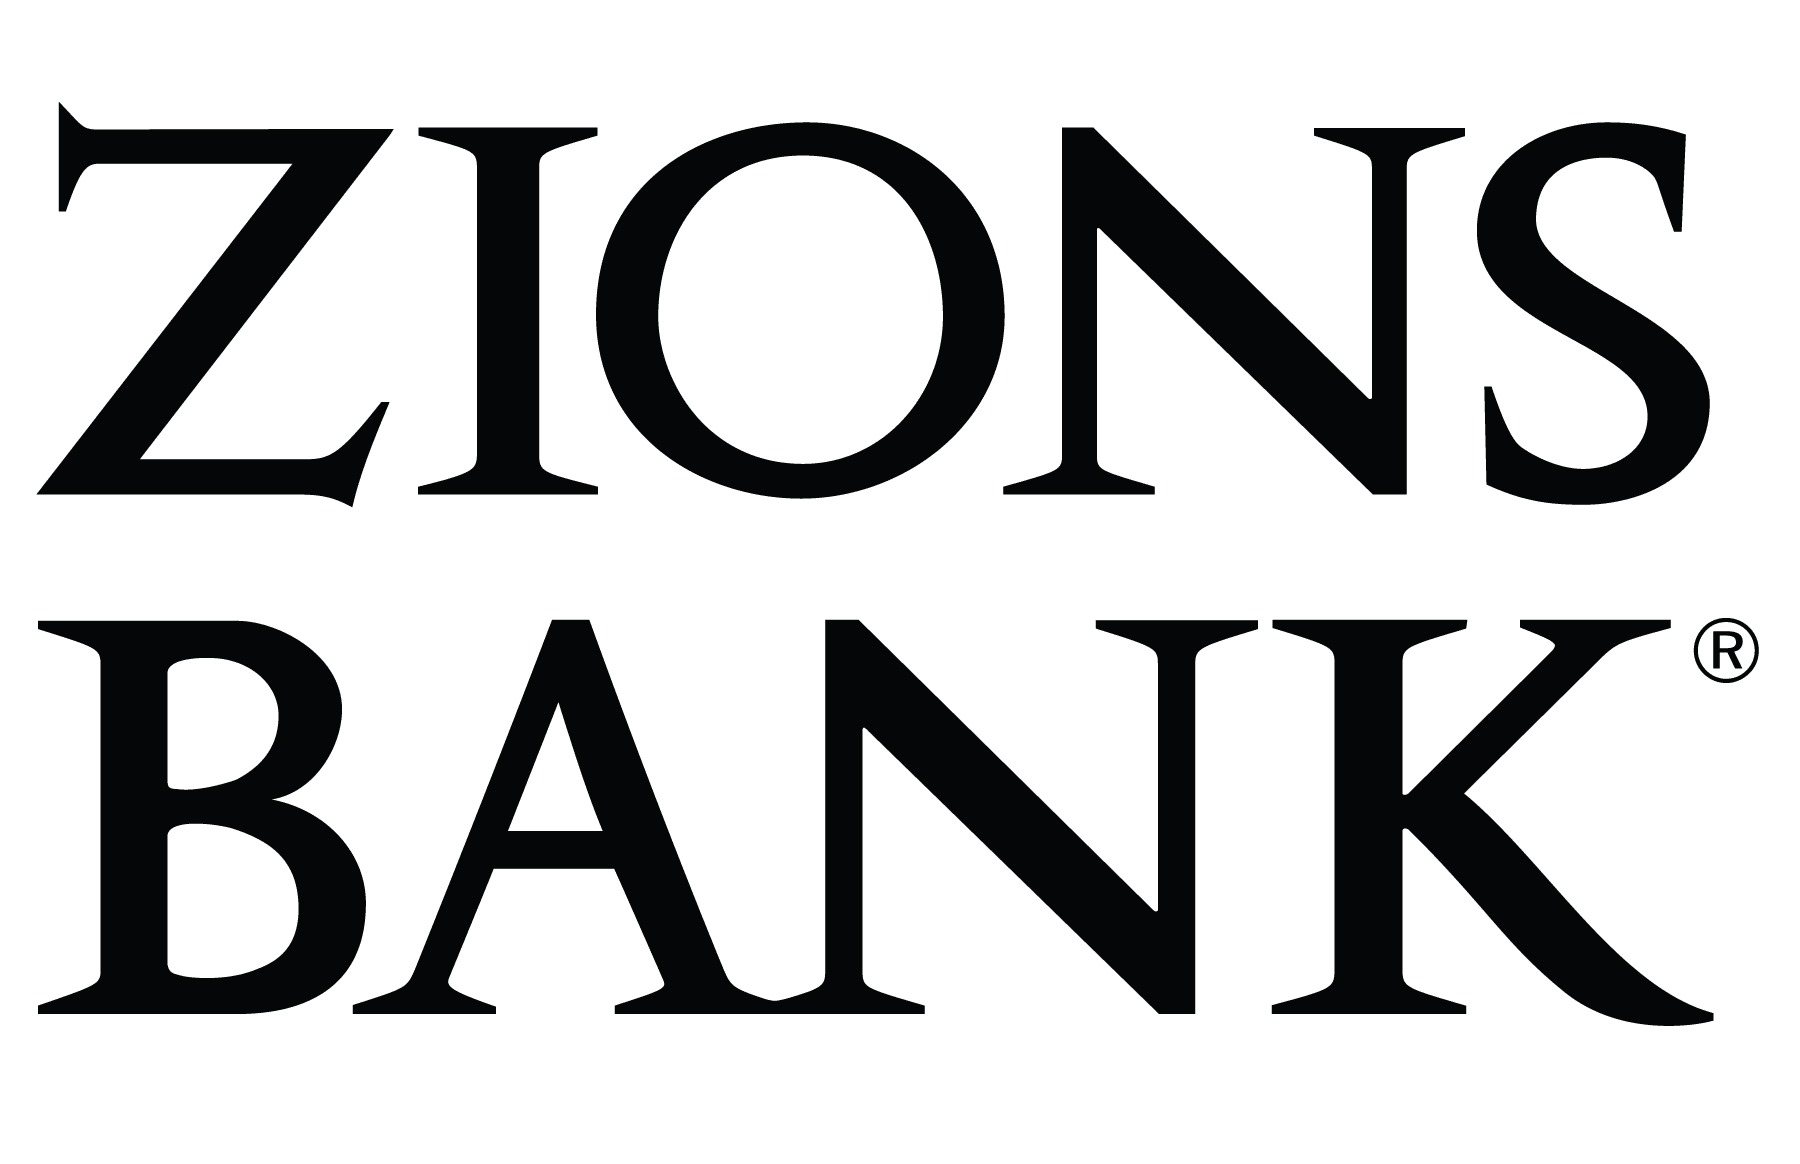 A black and white image of zions bank